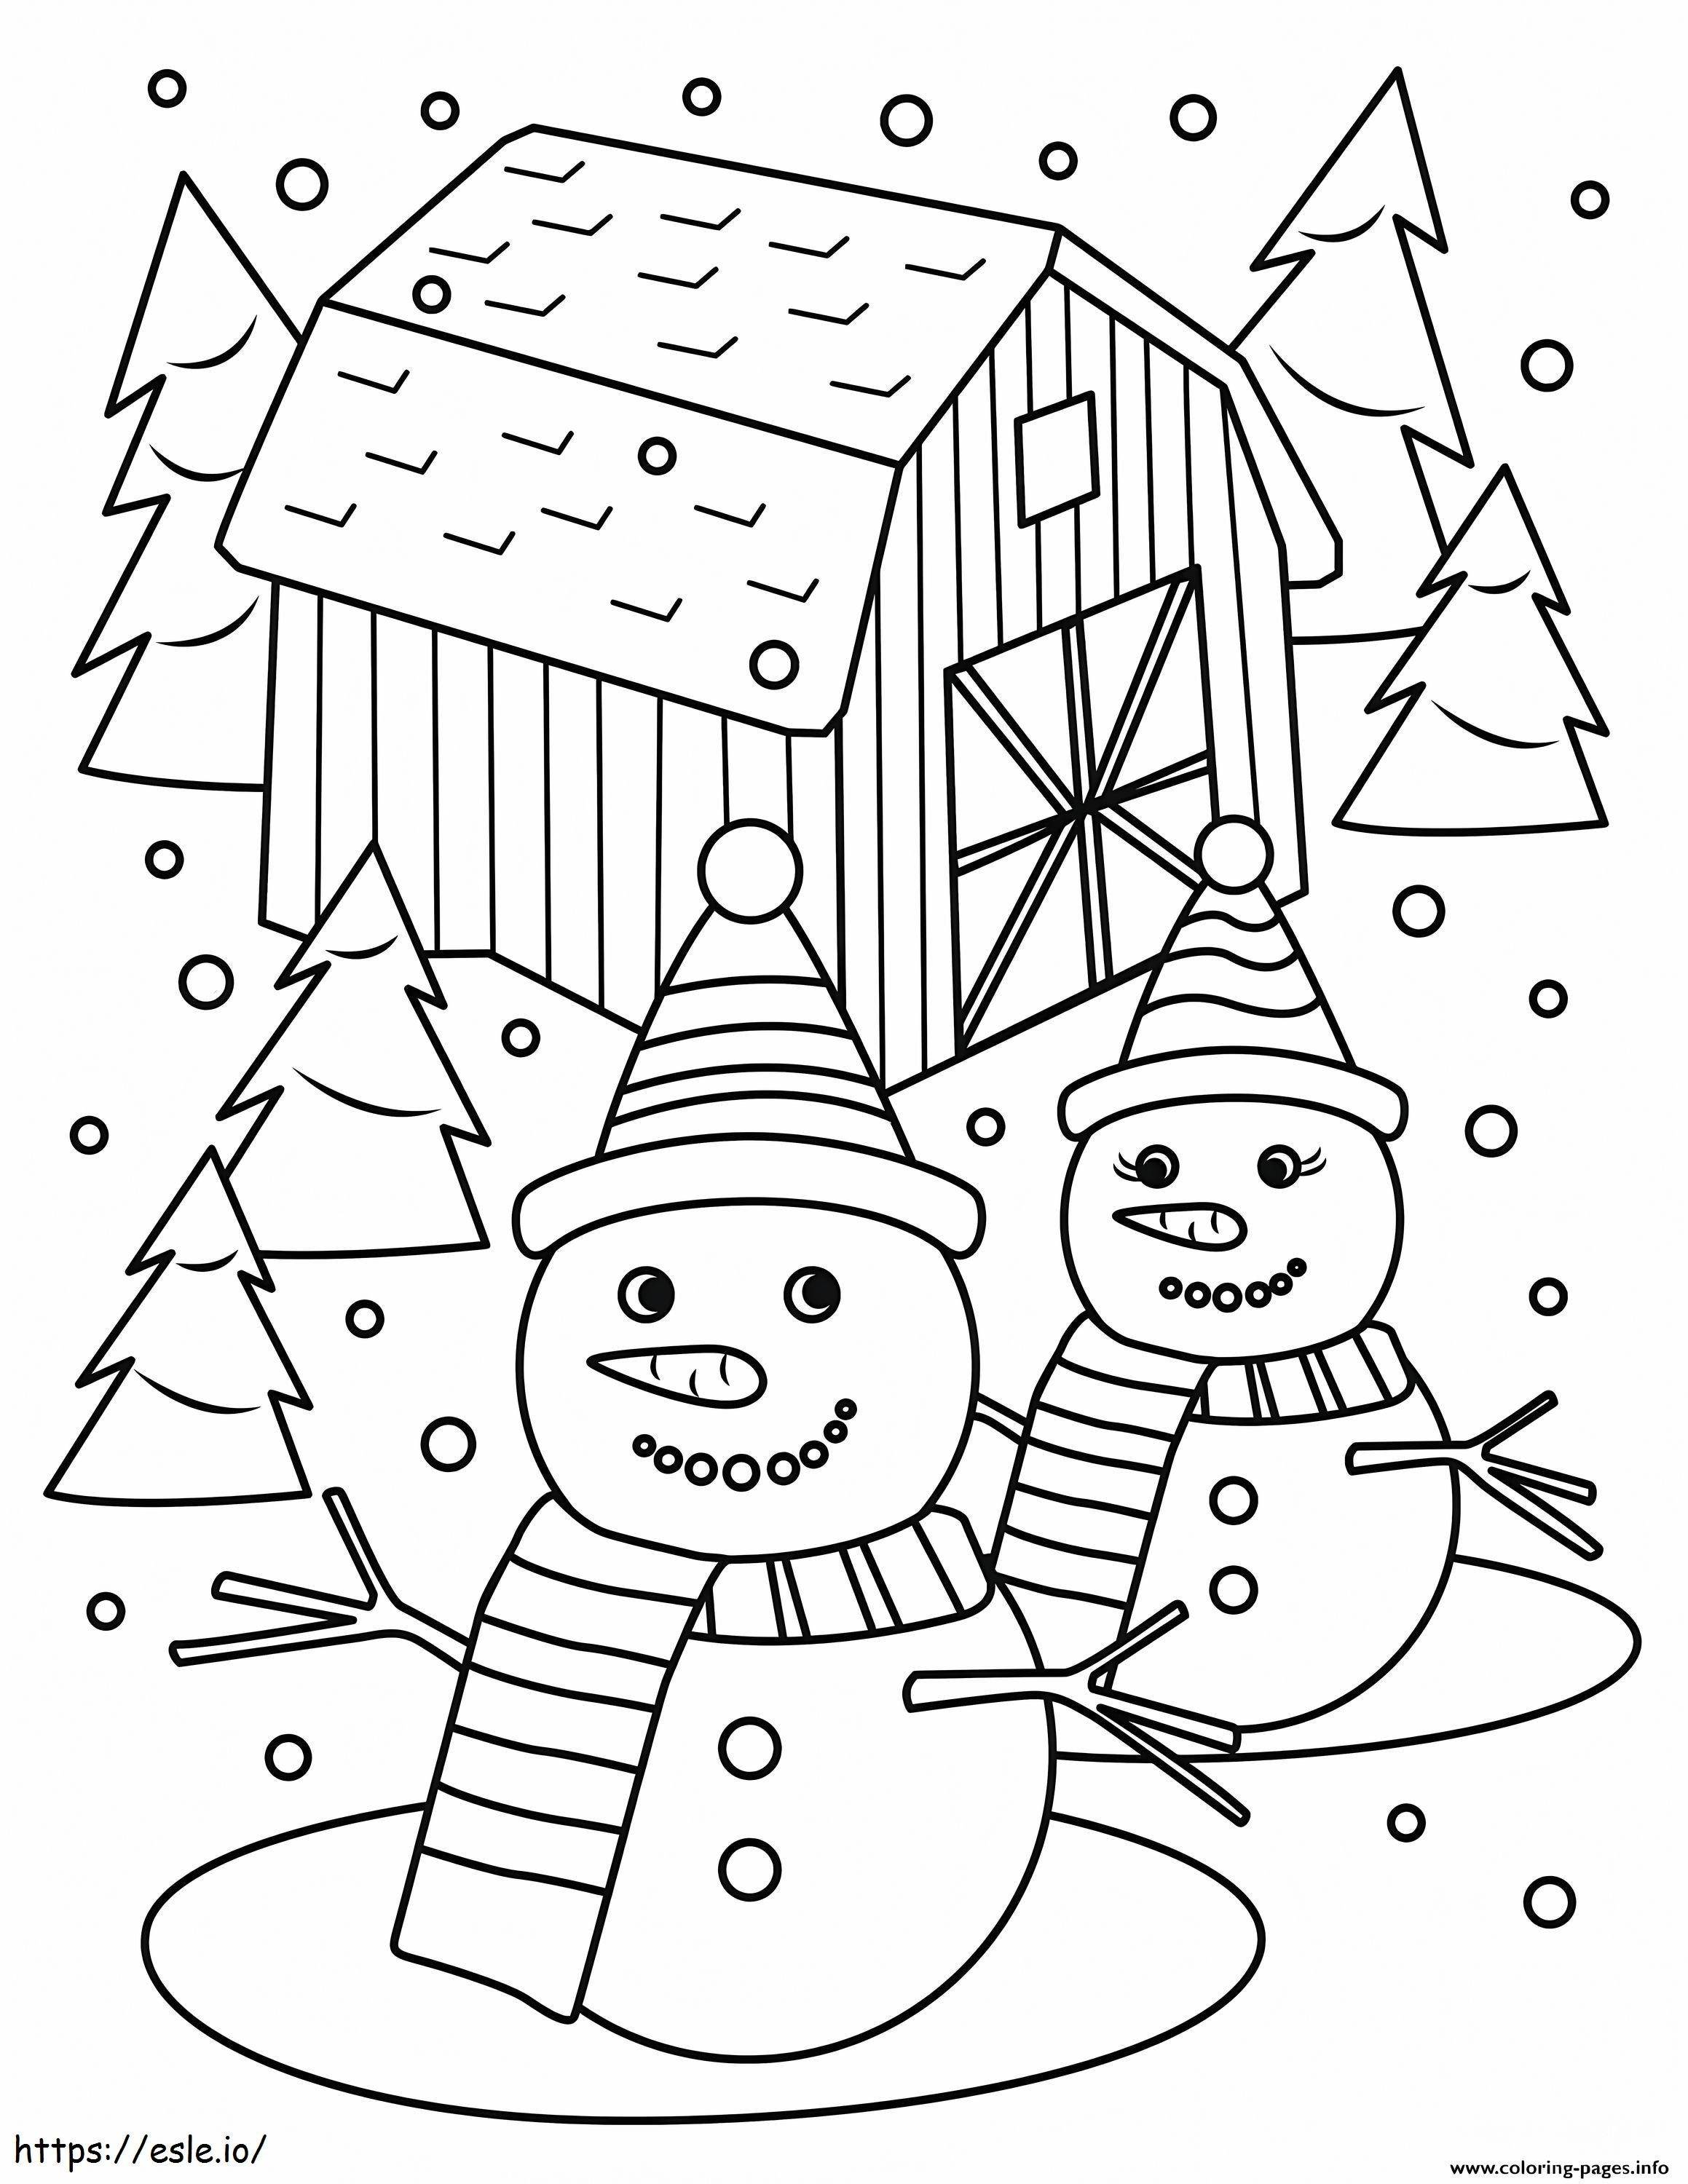 Two Snowman coloring page